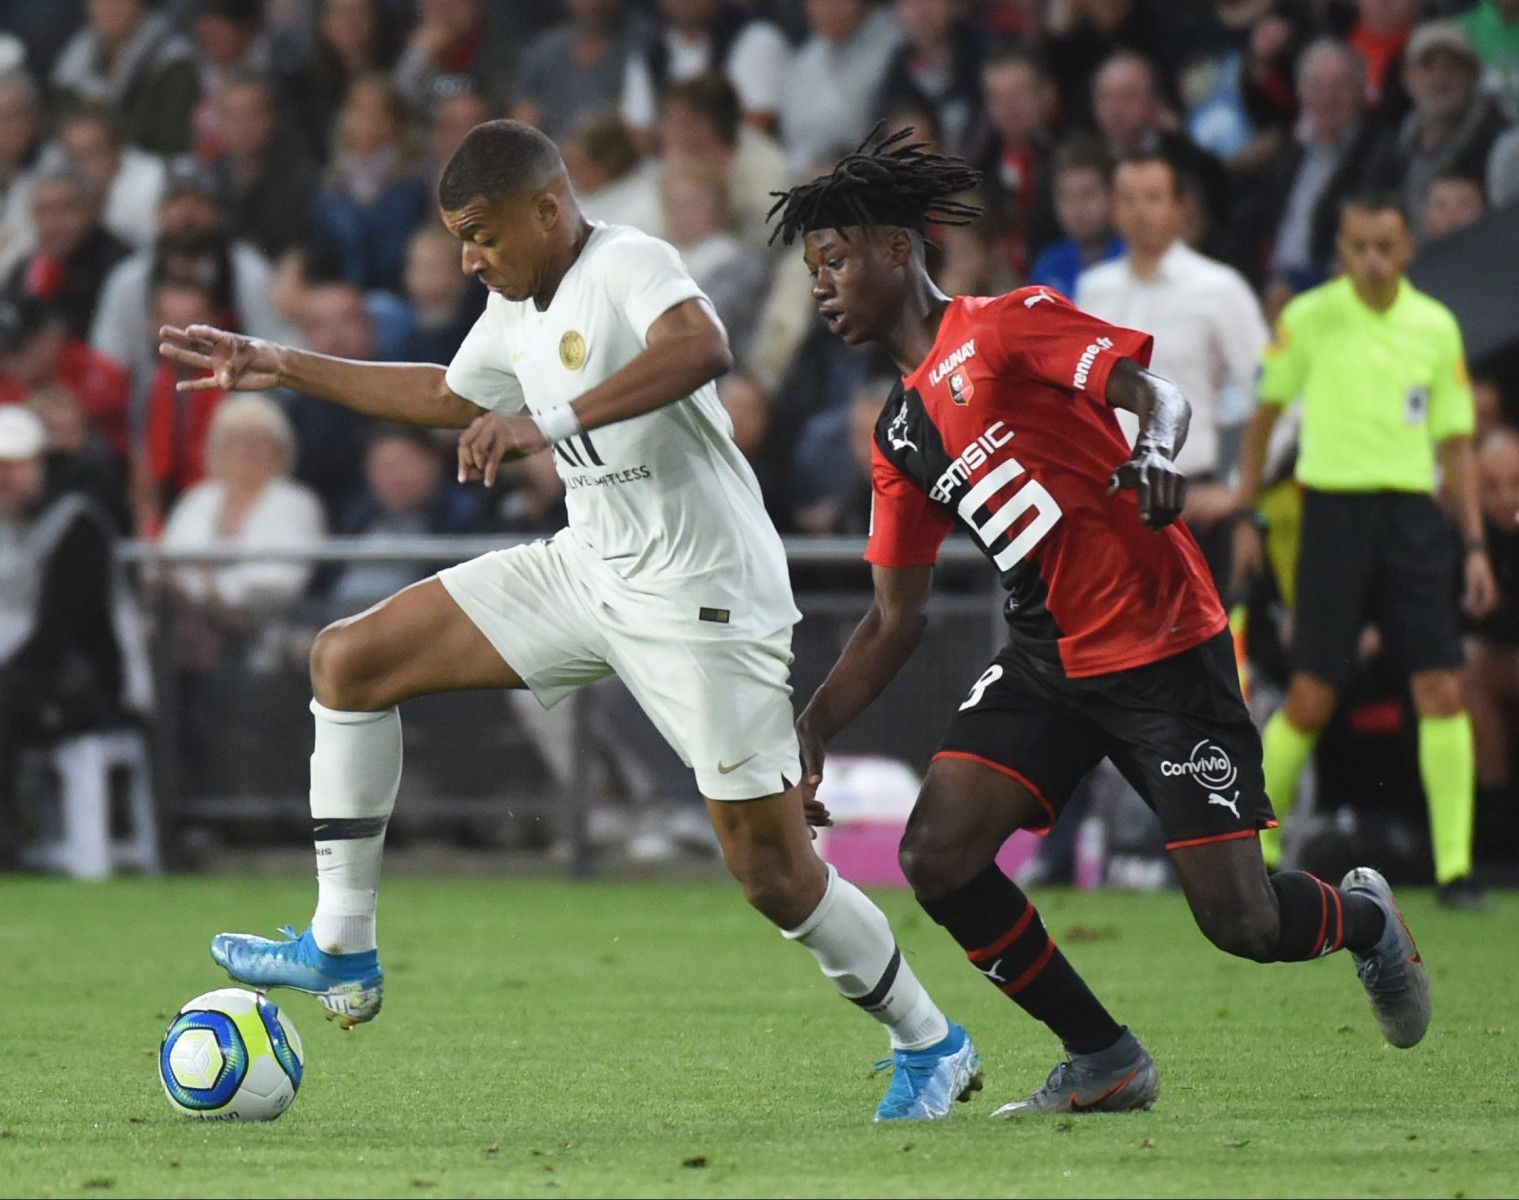 Camavinga played a starring role in beating PSG 2-1 with Rennes